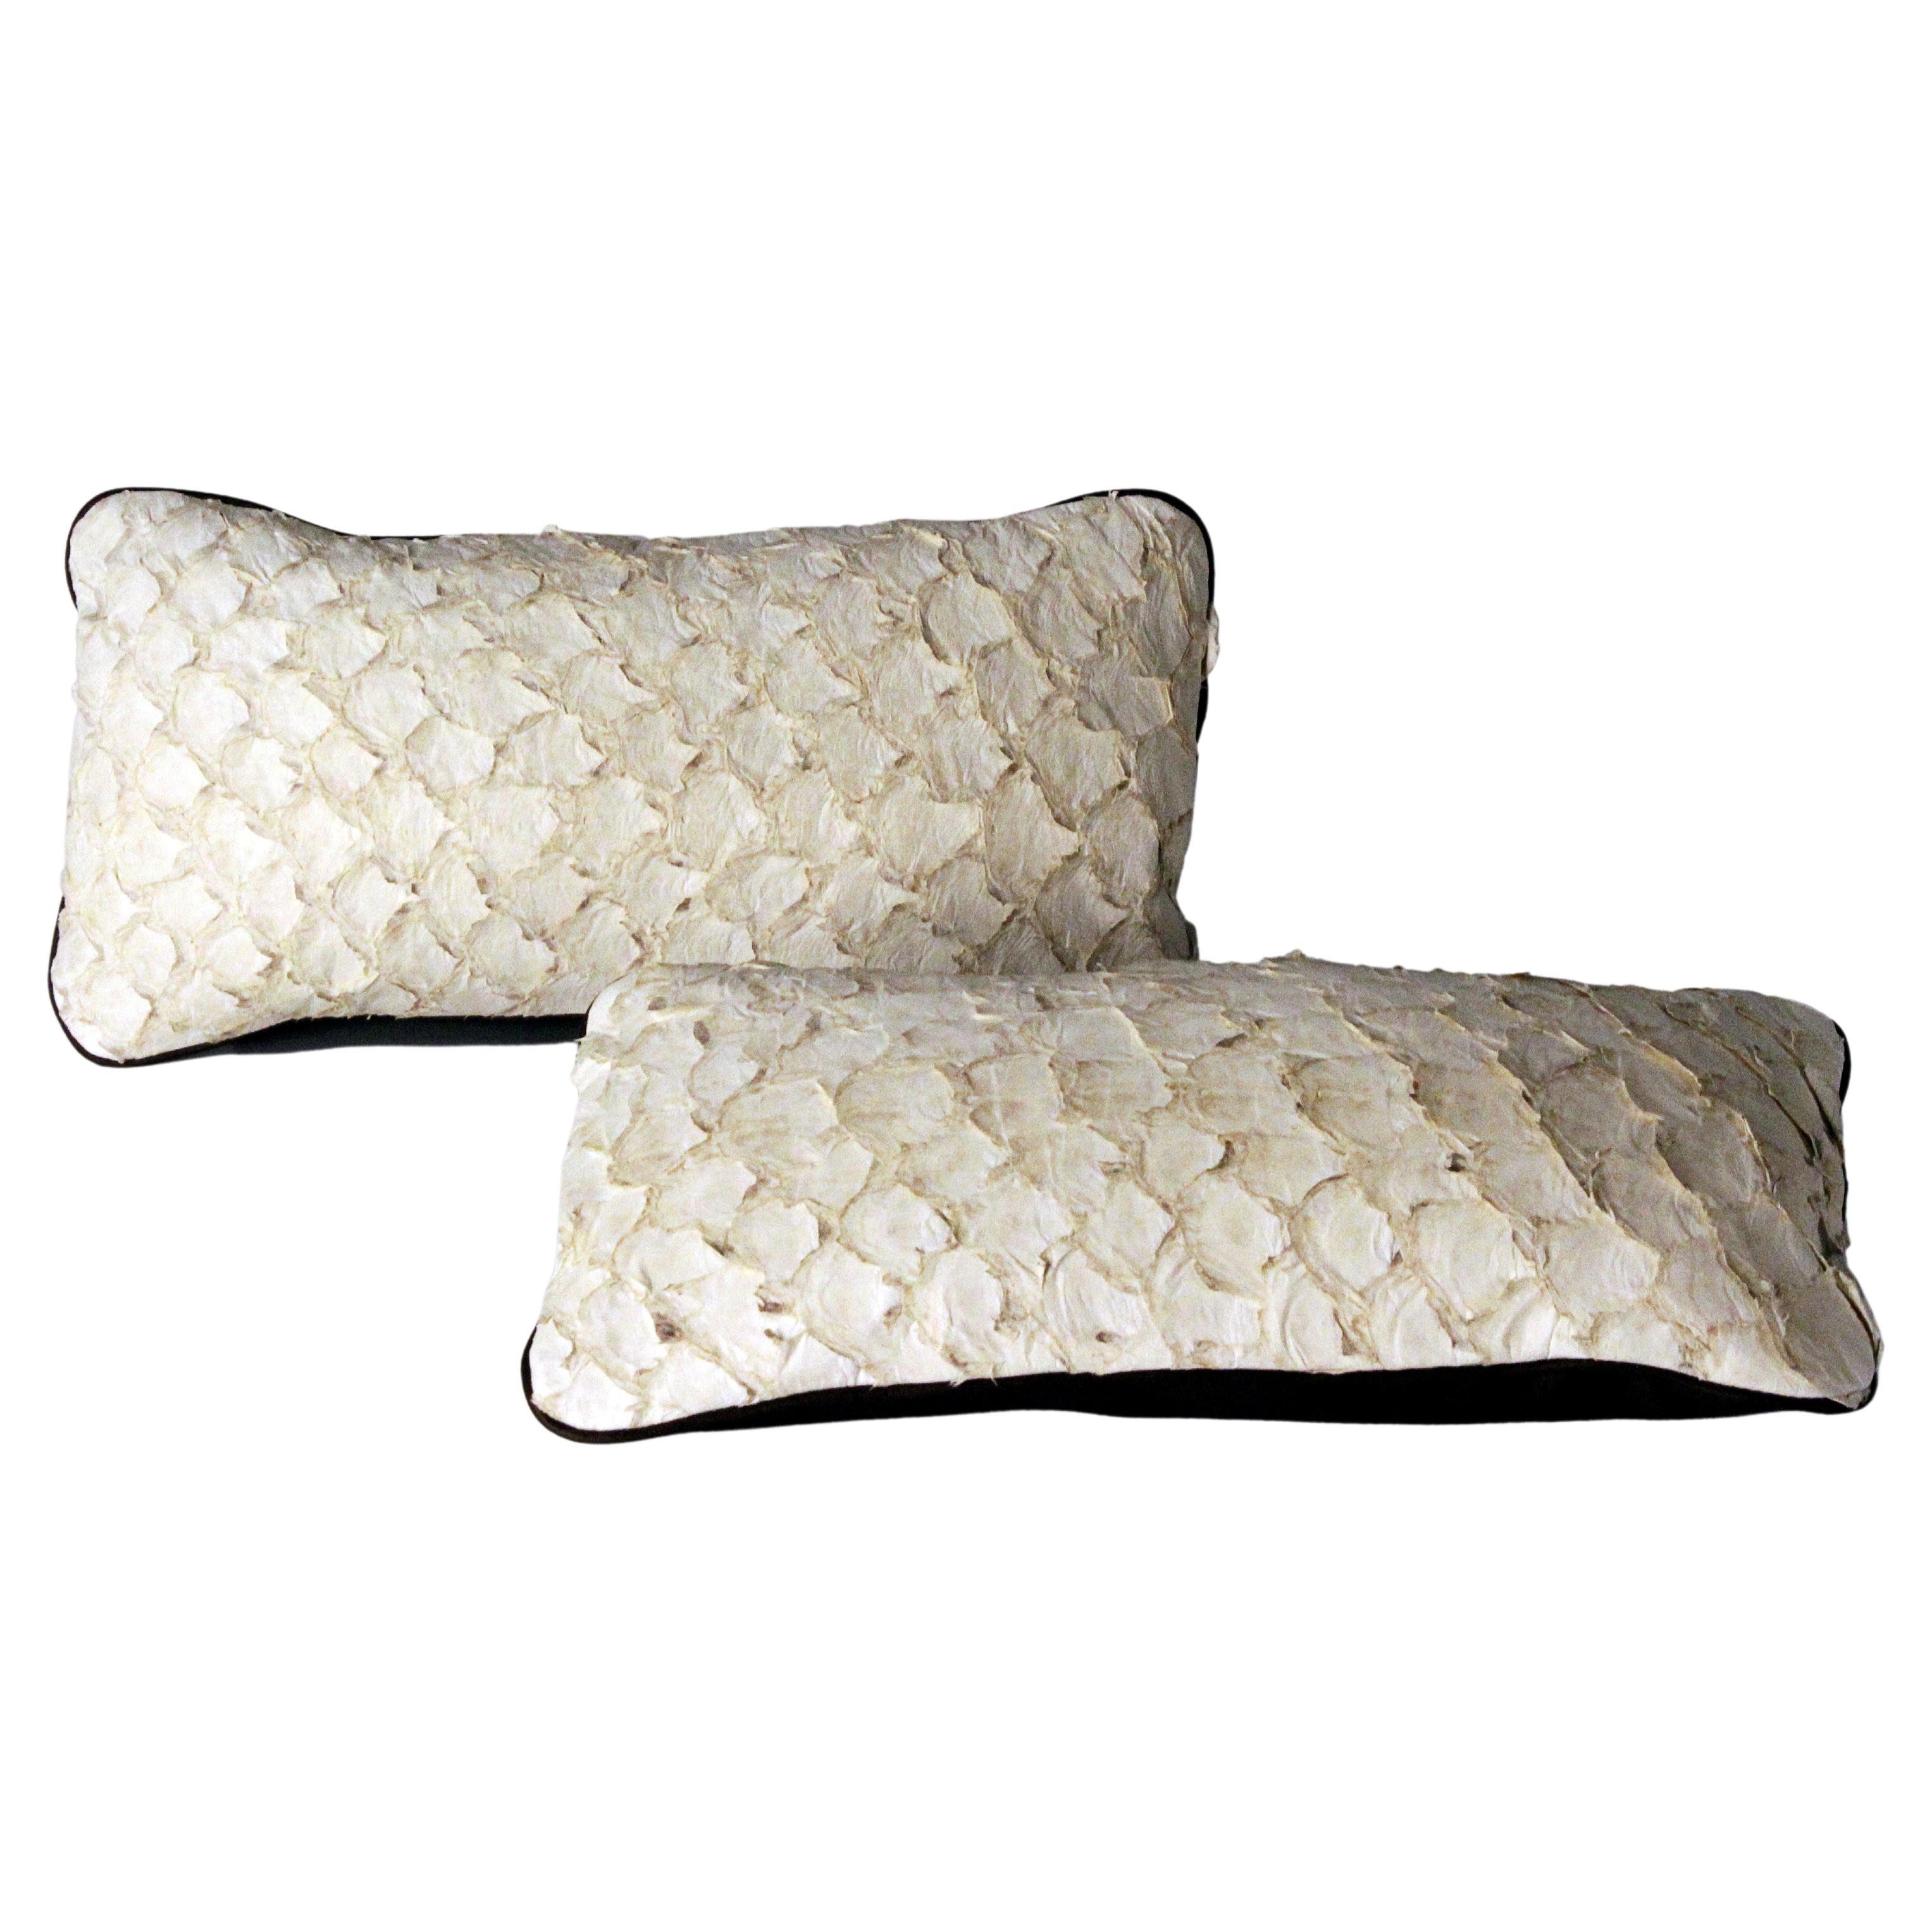 Set of 2 leather cushion, exclusive fish leather off-white color and dark brown back, small size 15.7 x 7.9 in. Untrimmed scales

Fish leather luxury cushion. The fish skins comes from Brazilian food industry, it is the second largest river fish in